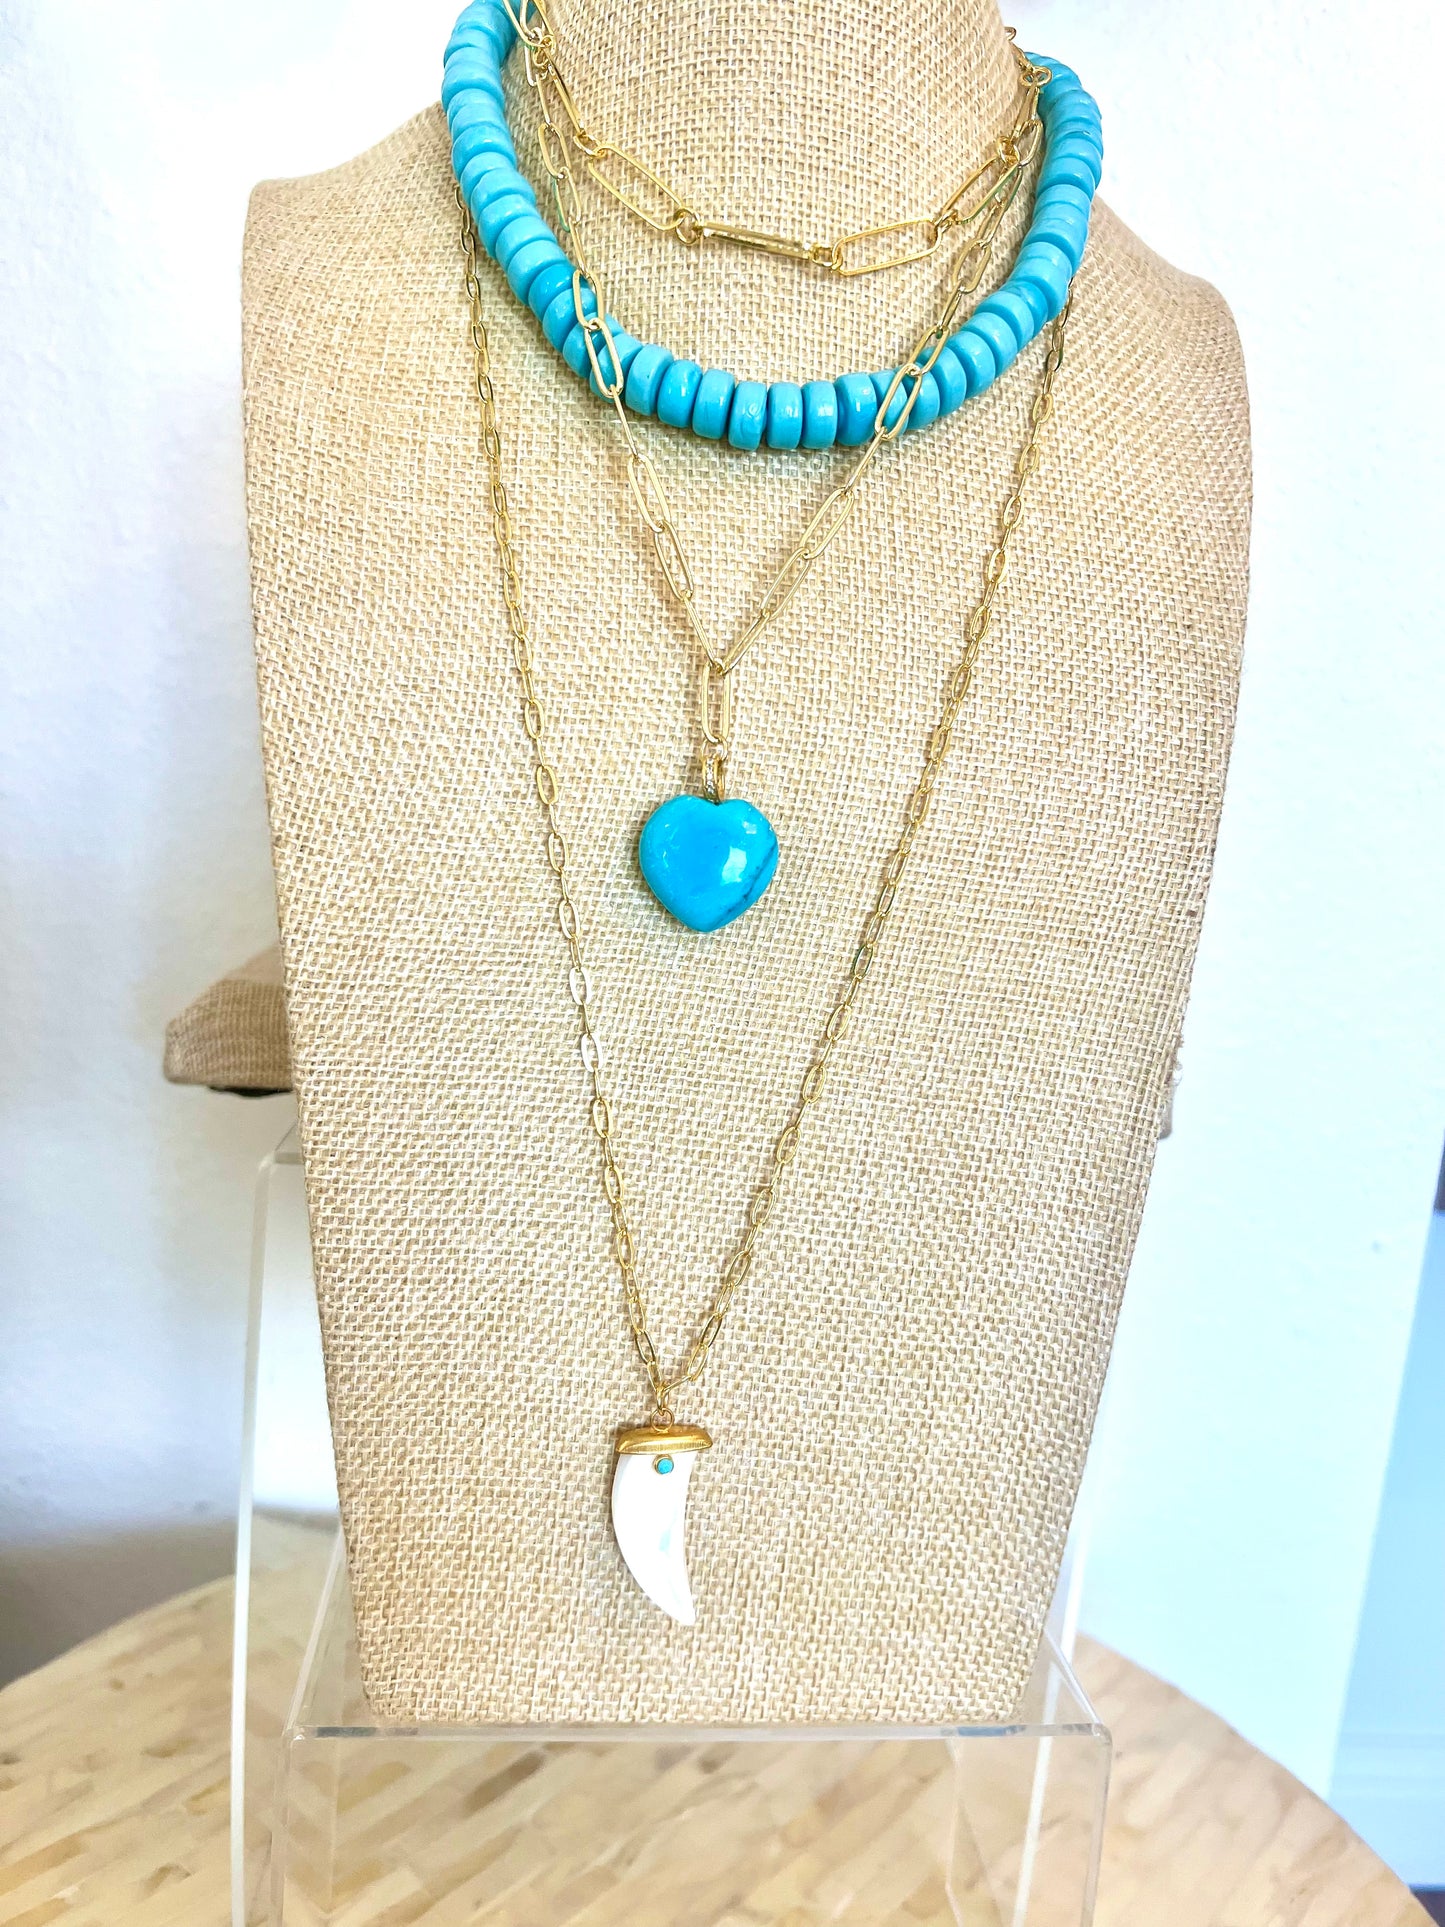 Turquoise Glass Bead Necklace